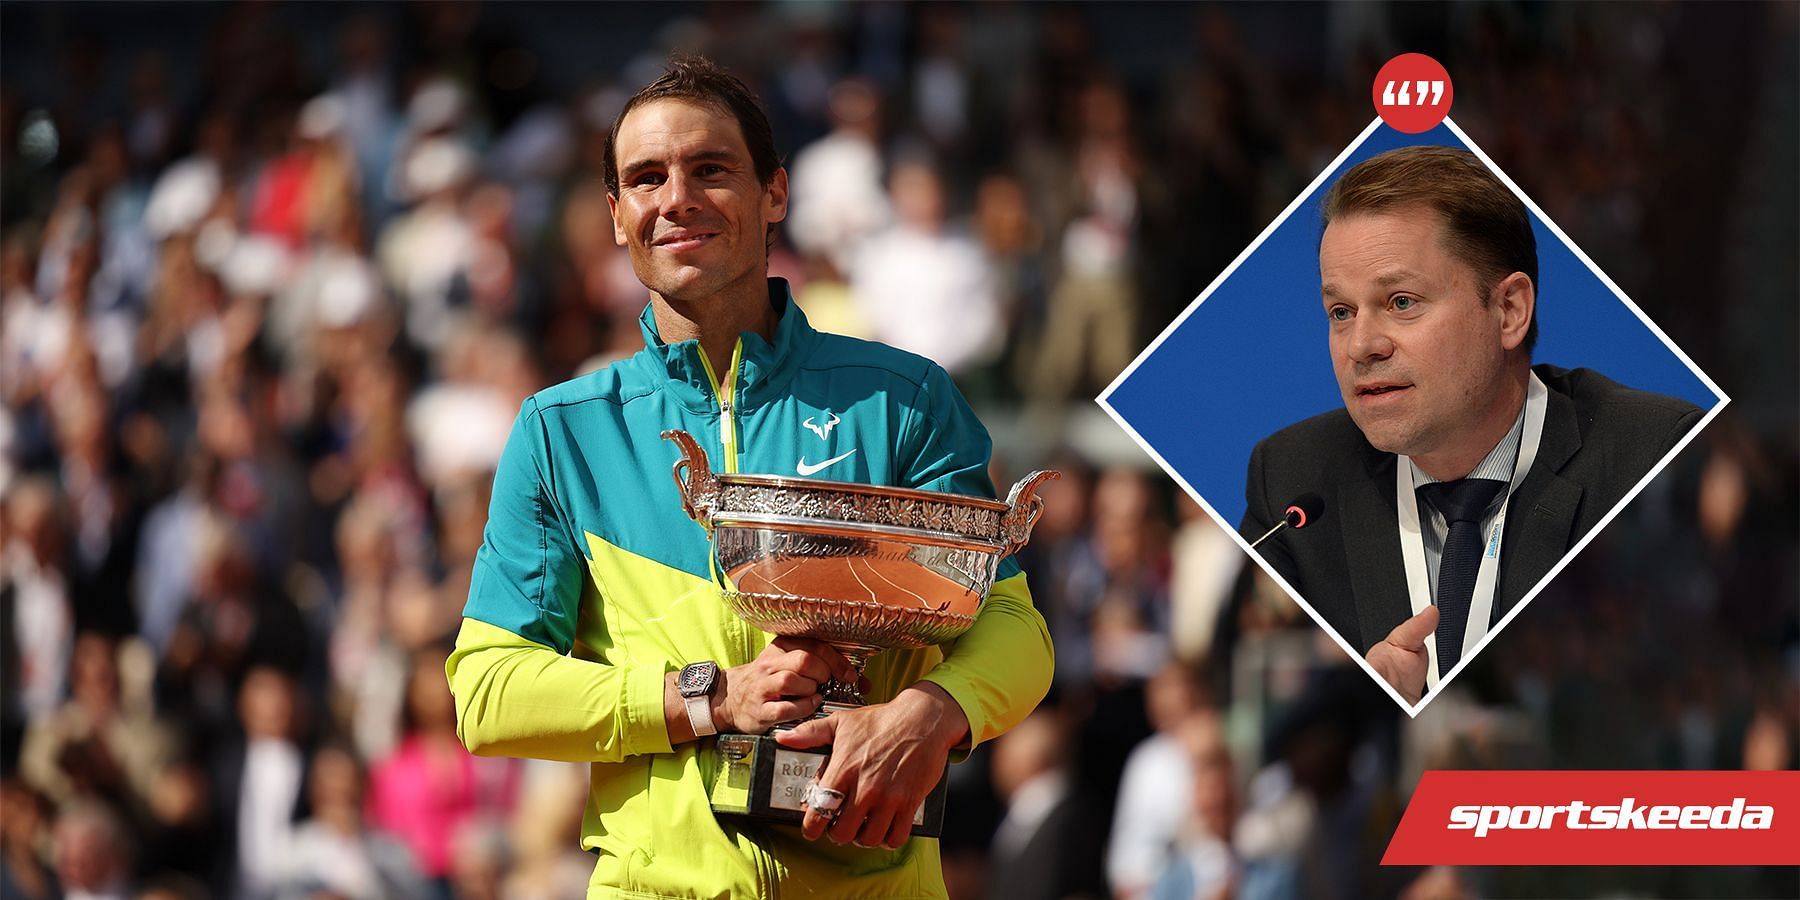 Olivier Niggli said that Rafael Nadal did not flout any rules